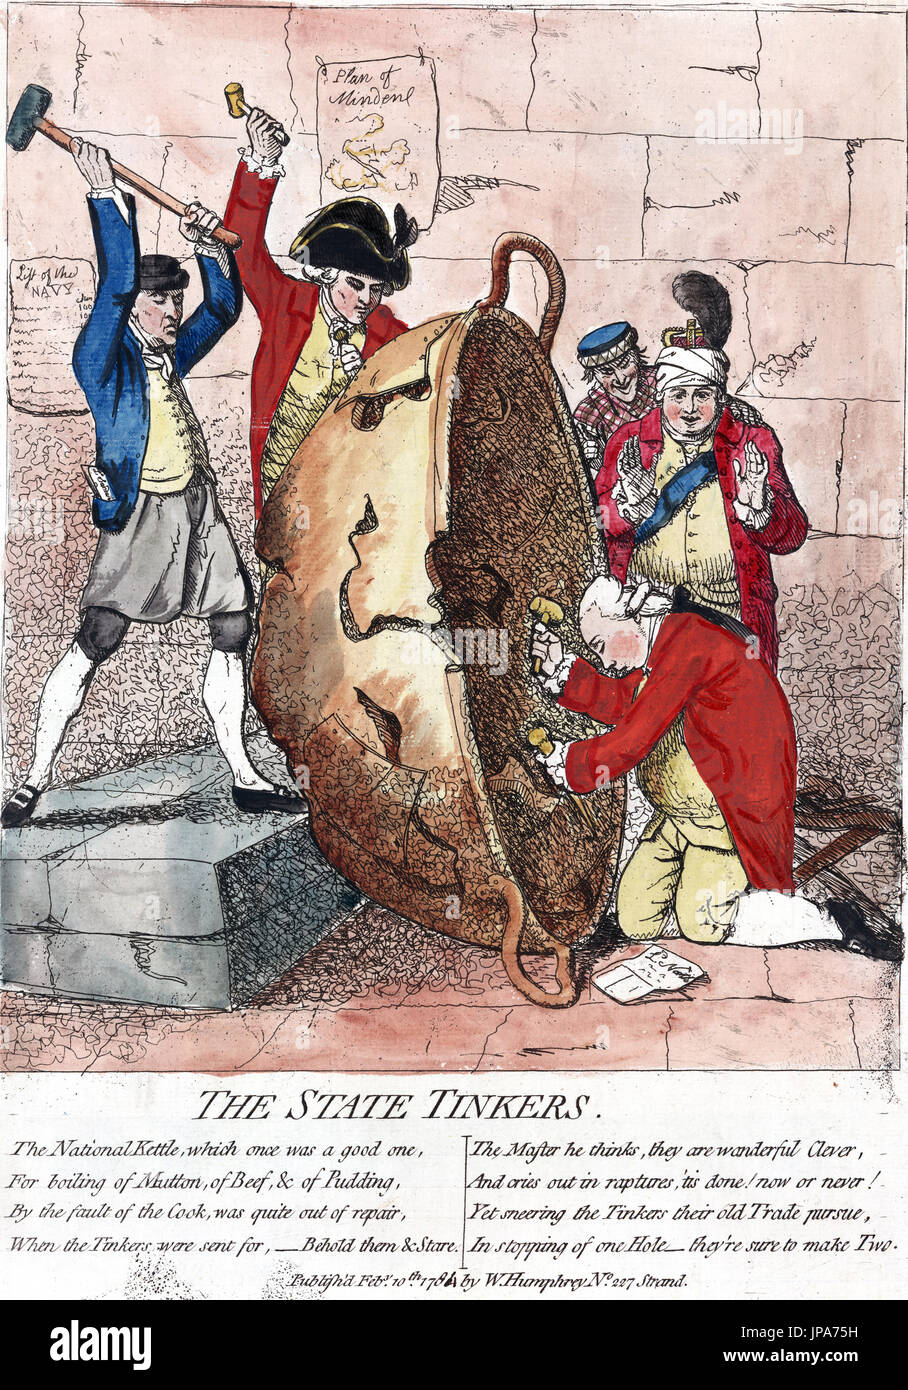 JAMES GILLRAY (1756-1815) English cartoonist. 'The state tinkers' 1780 engraving showing Lord North on his knees watched by King George III as they all conspire to ruin the country by their lack of skill. Stock Photo